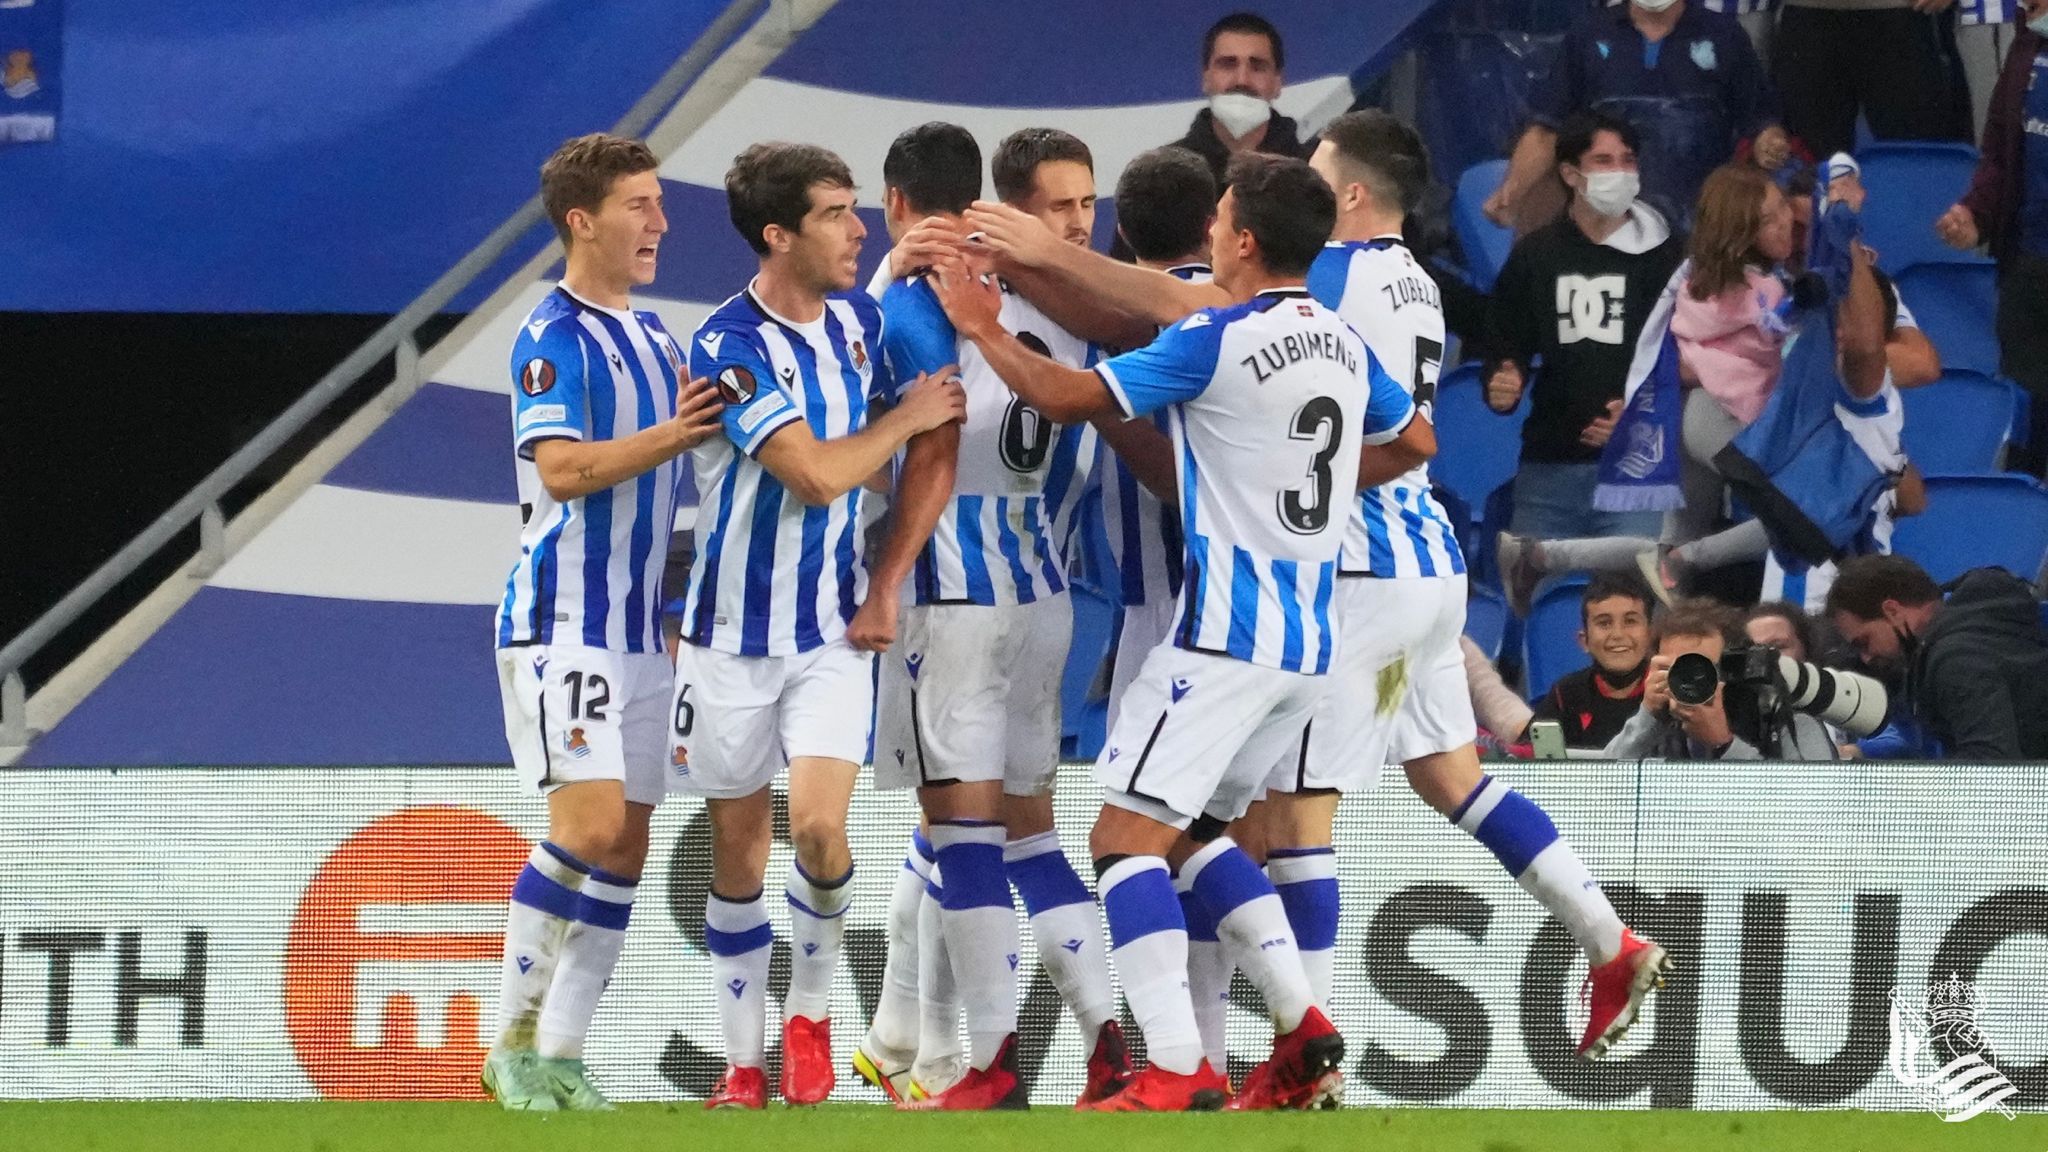 Real Sociedad draw 1-1 with Monaco at the Reale Arena in the Europa League